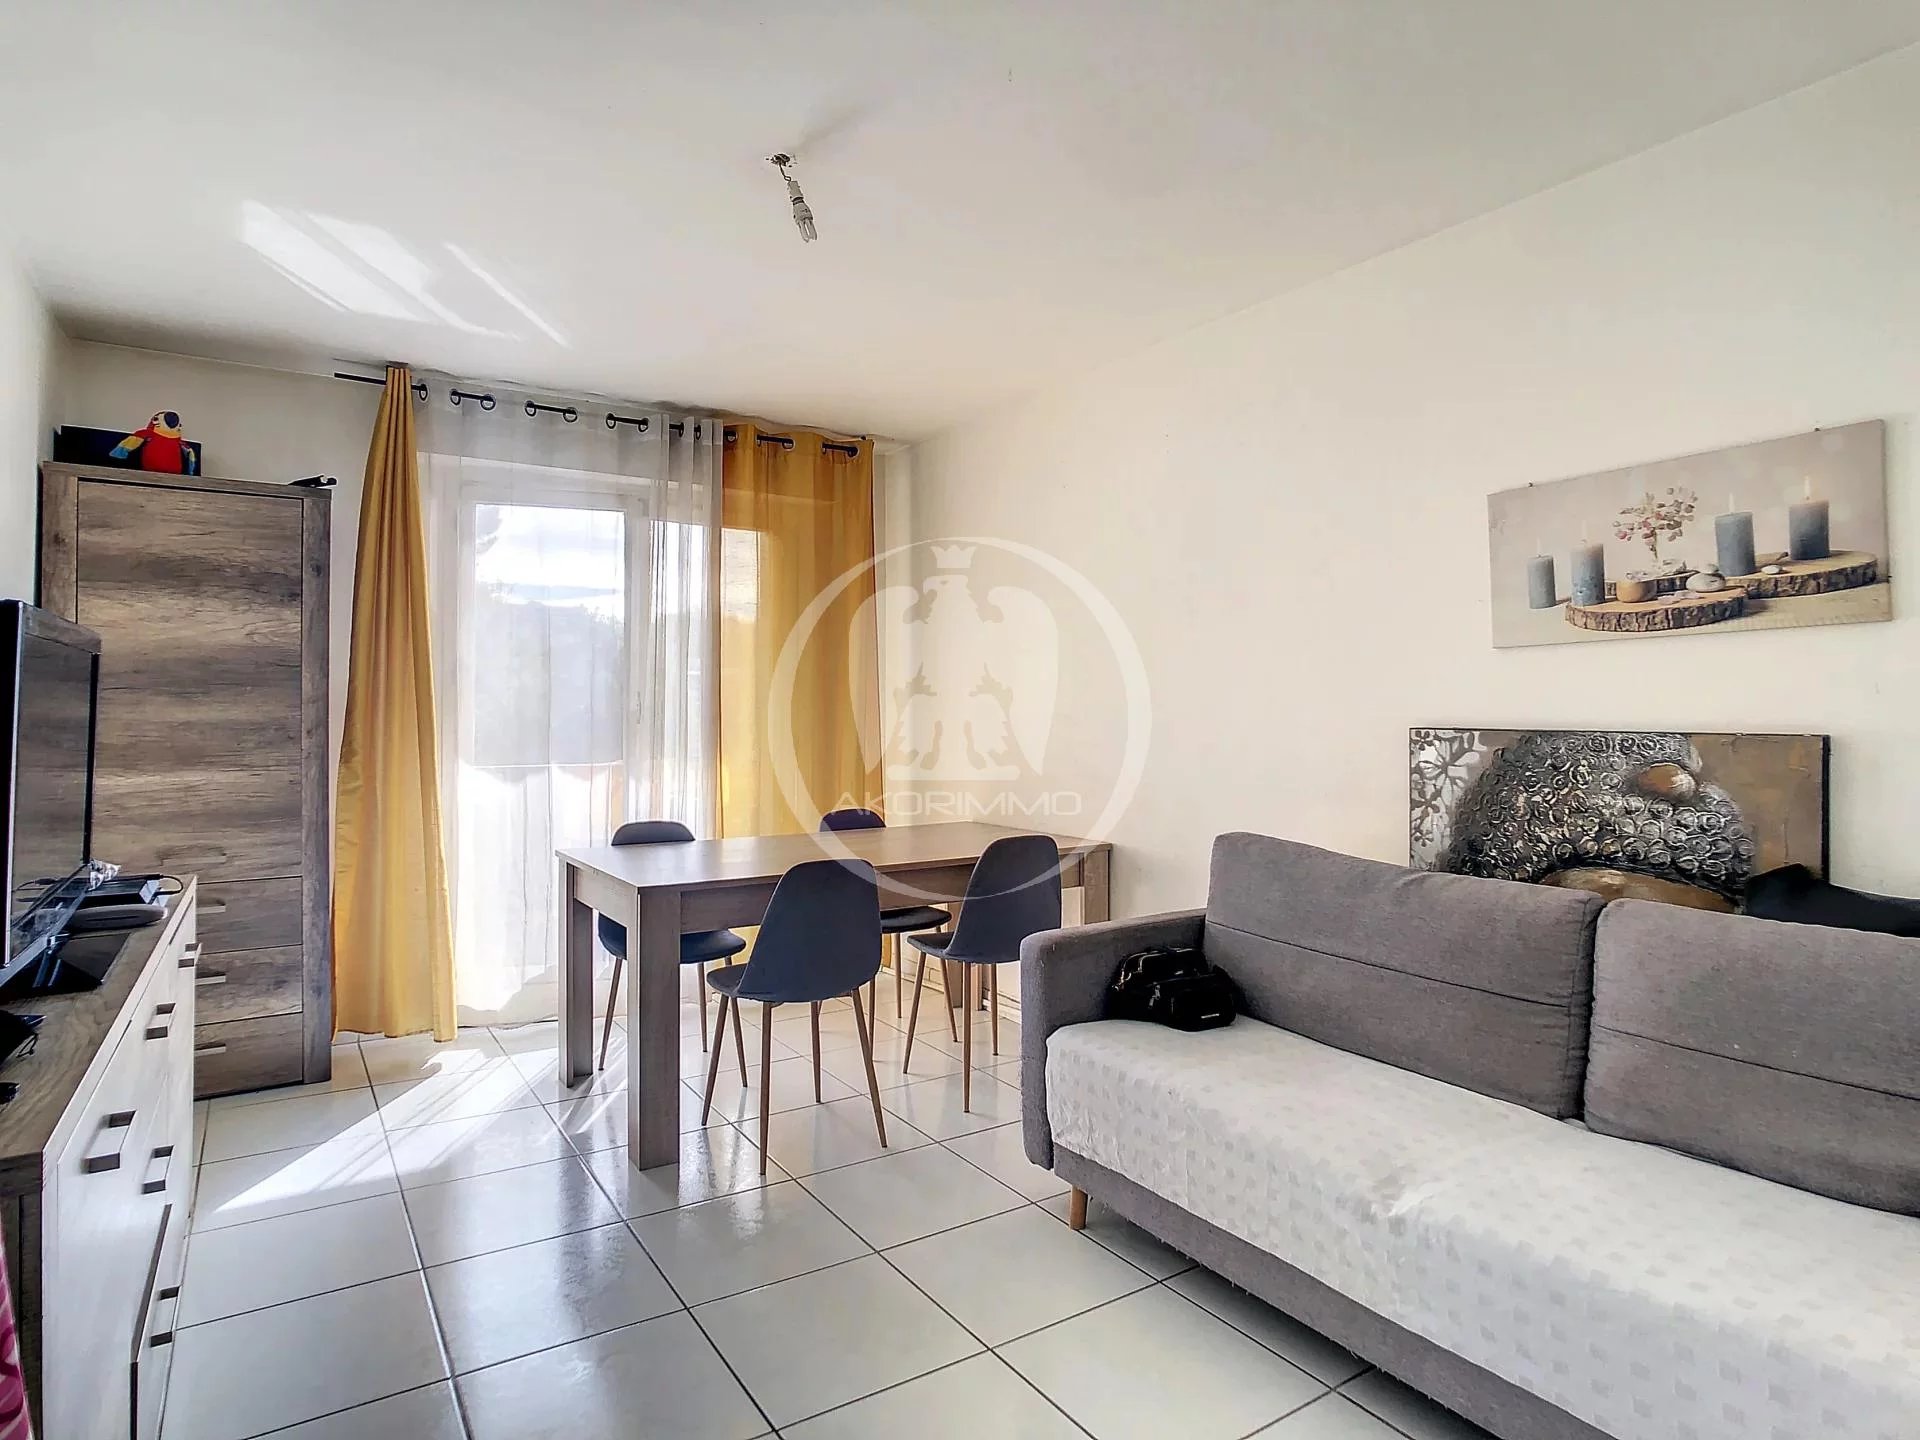 Verkoop Appartement - Nice Le Ray